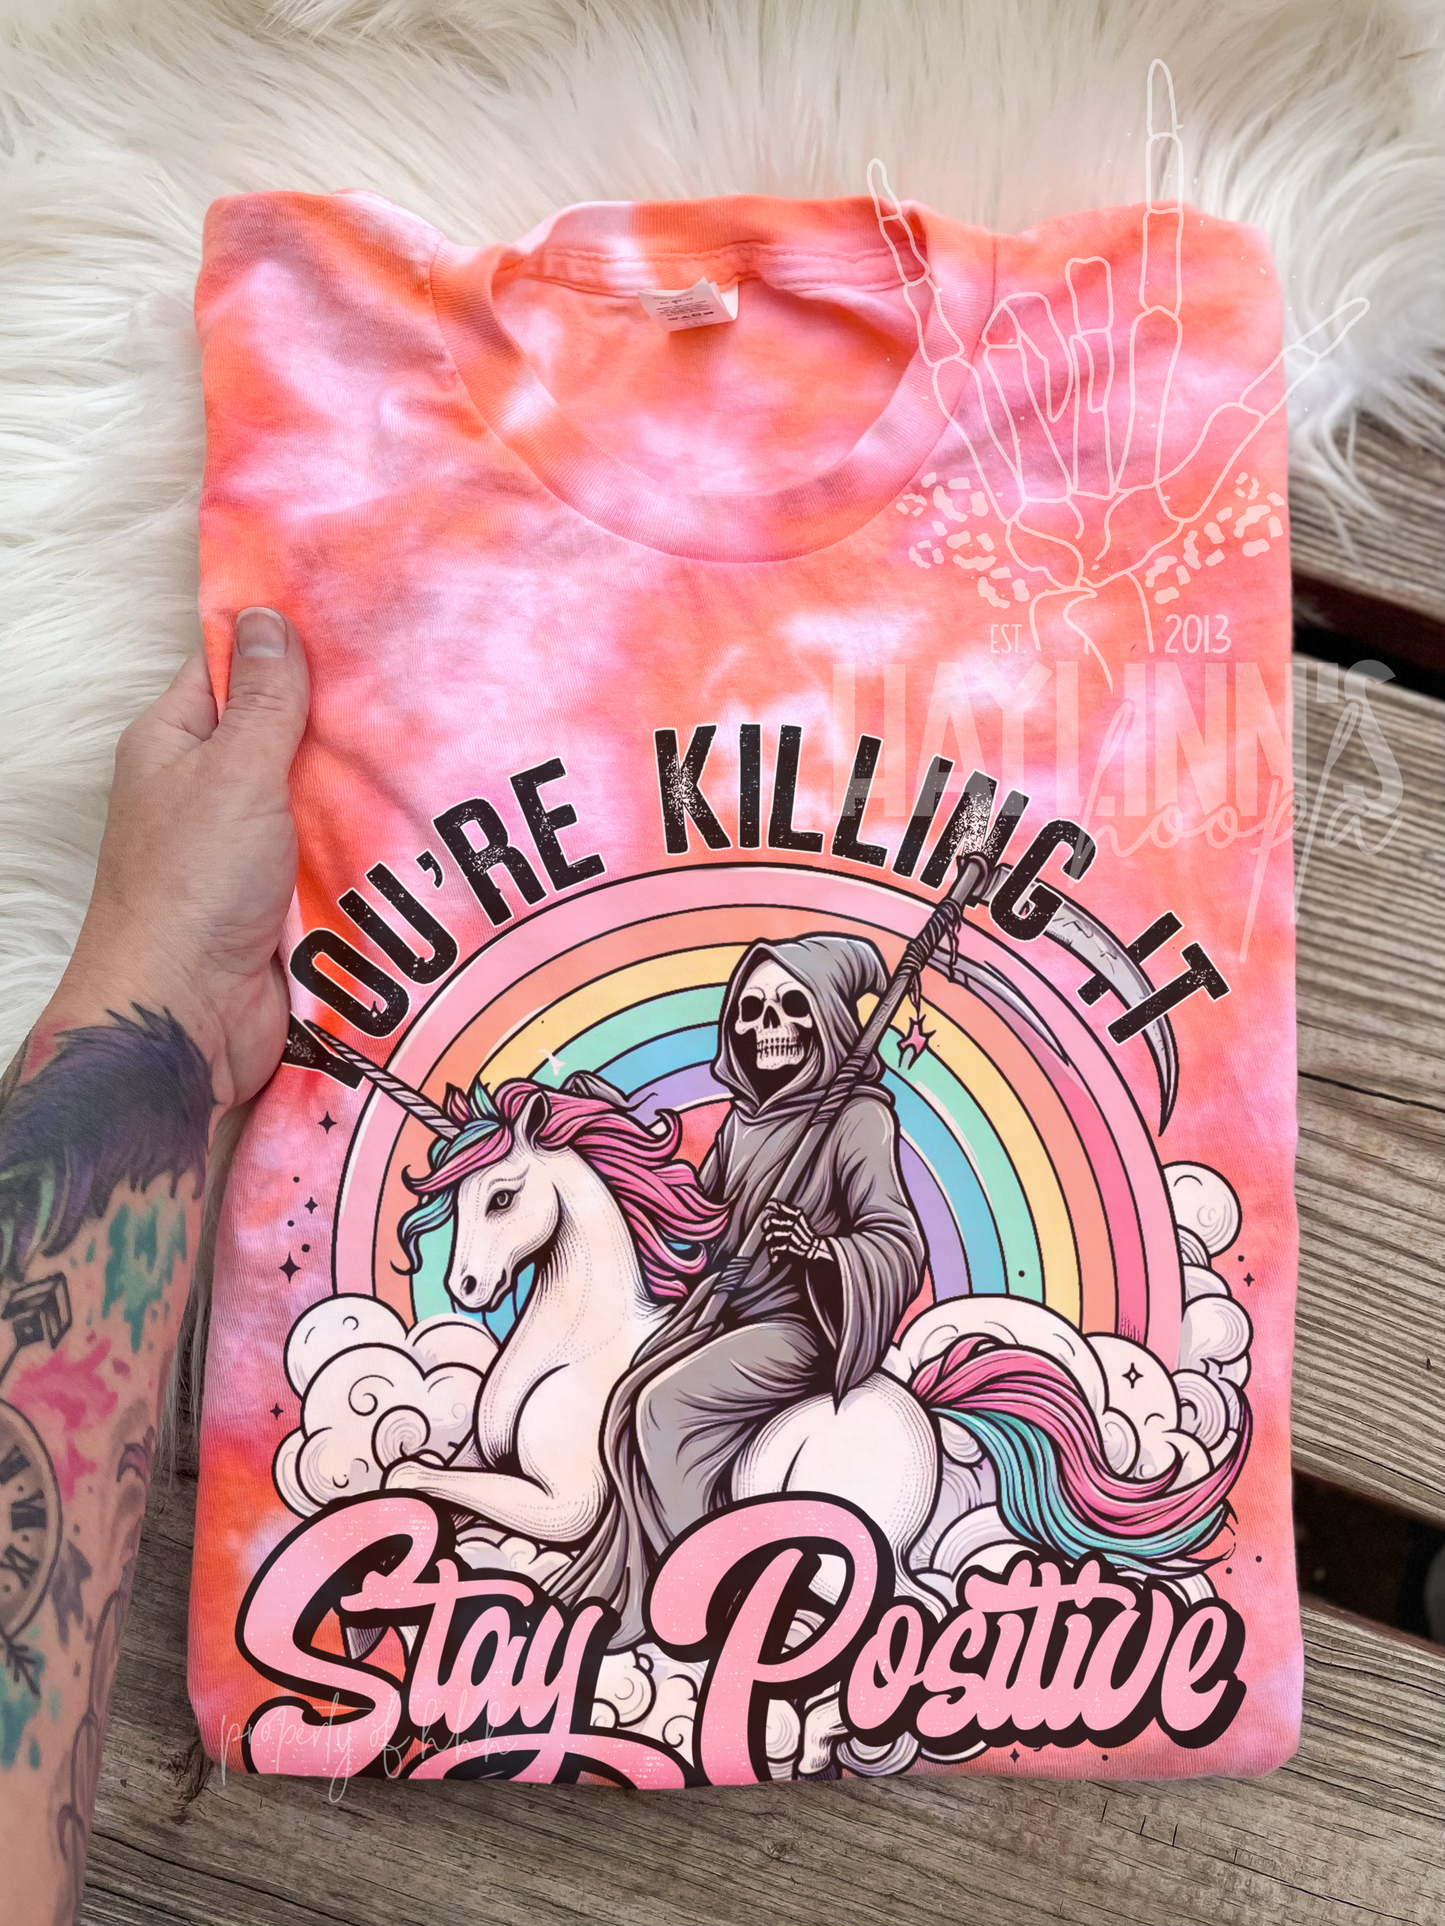 You're Killing It; Stay Positive Tee